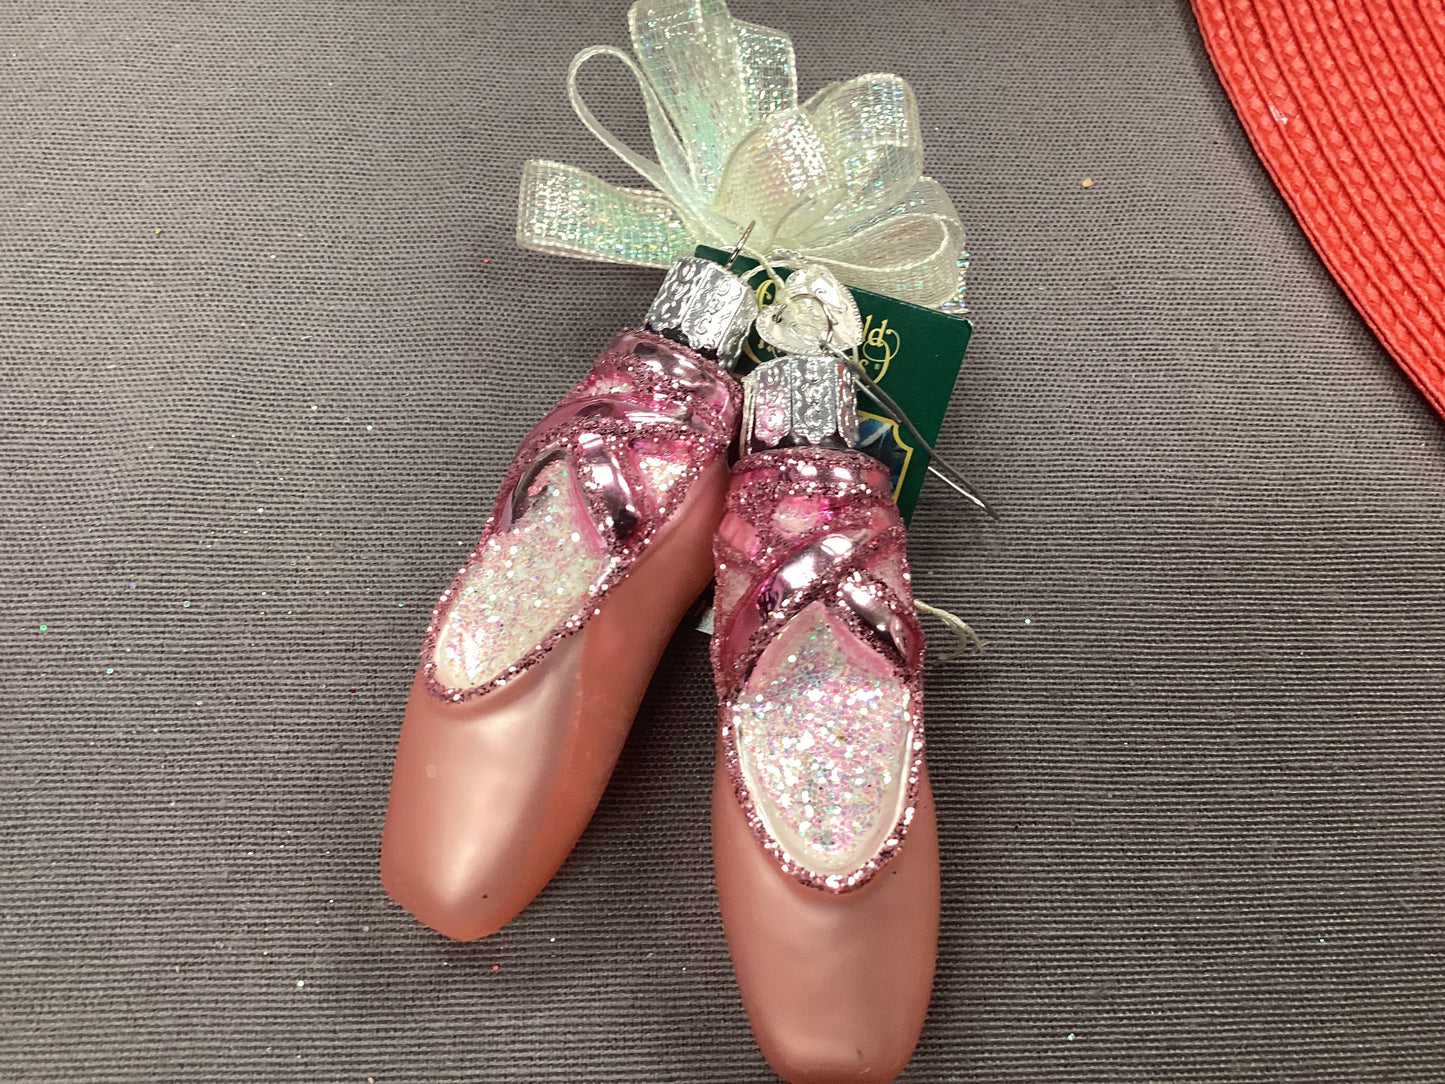 PAIR OF BALLET SLIPPERS ornaments